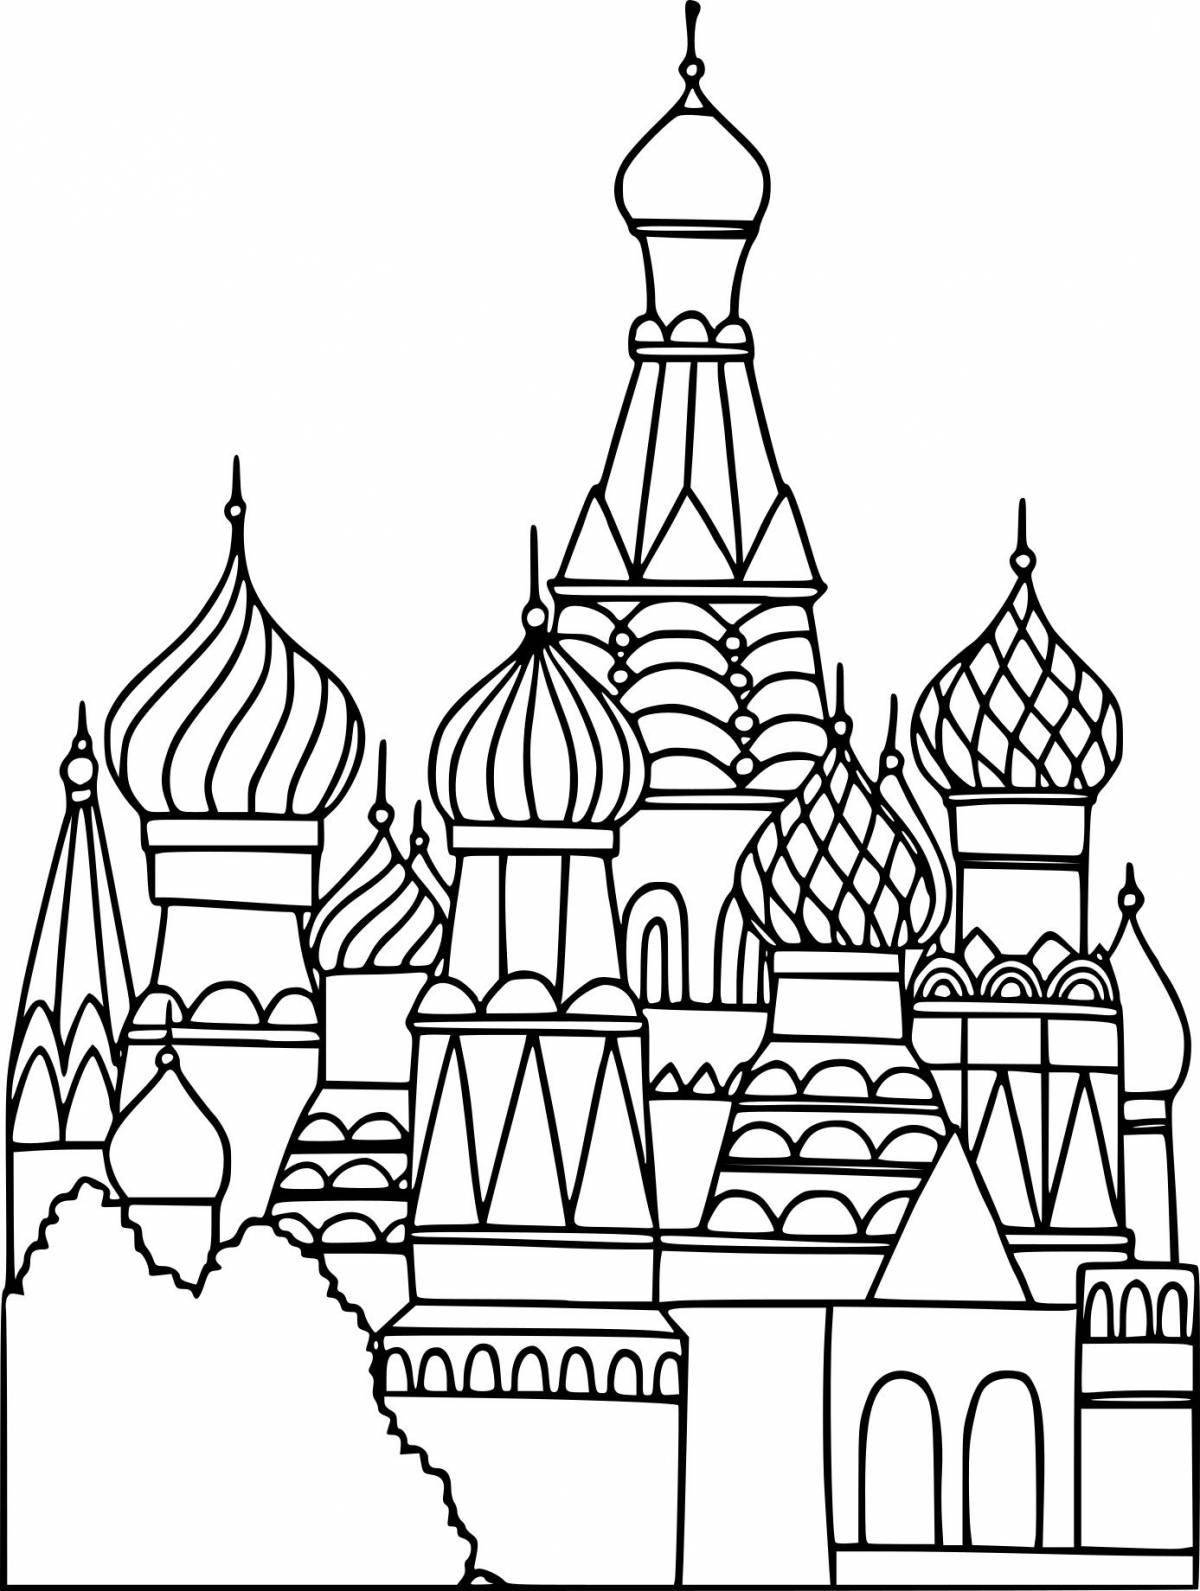 Coloring page amazing saint basil's cathedral